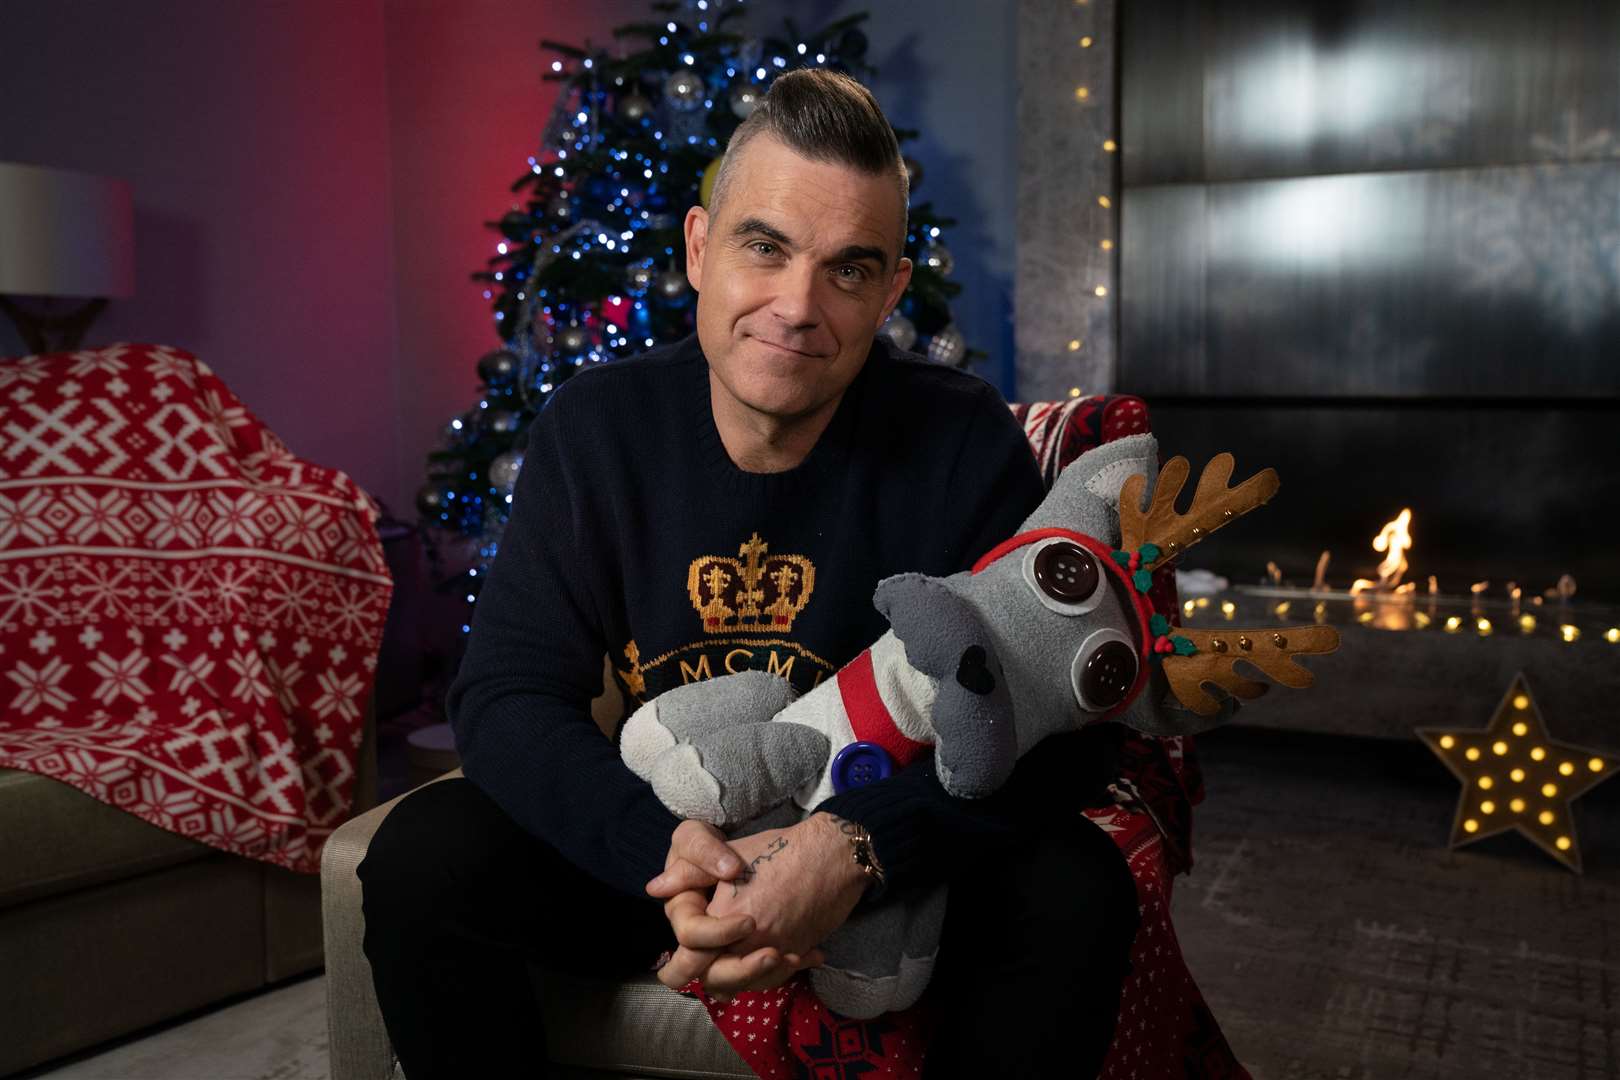 Robbie Williams made a festive appearance in 2019